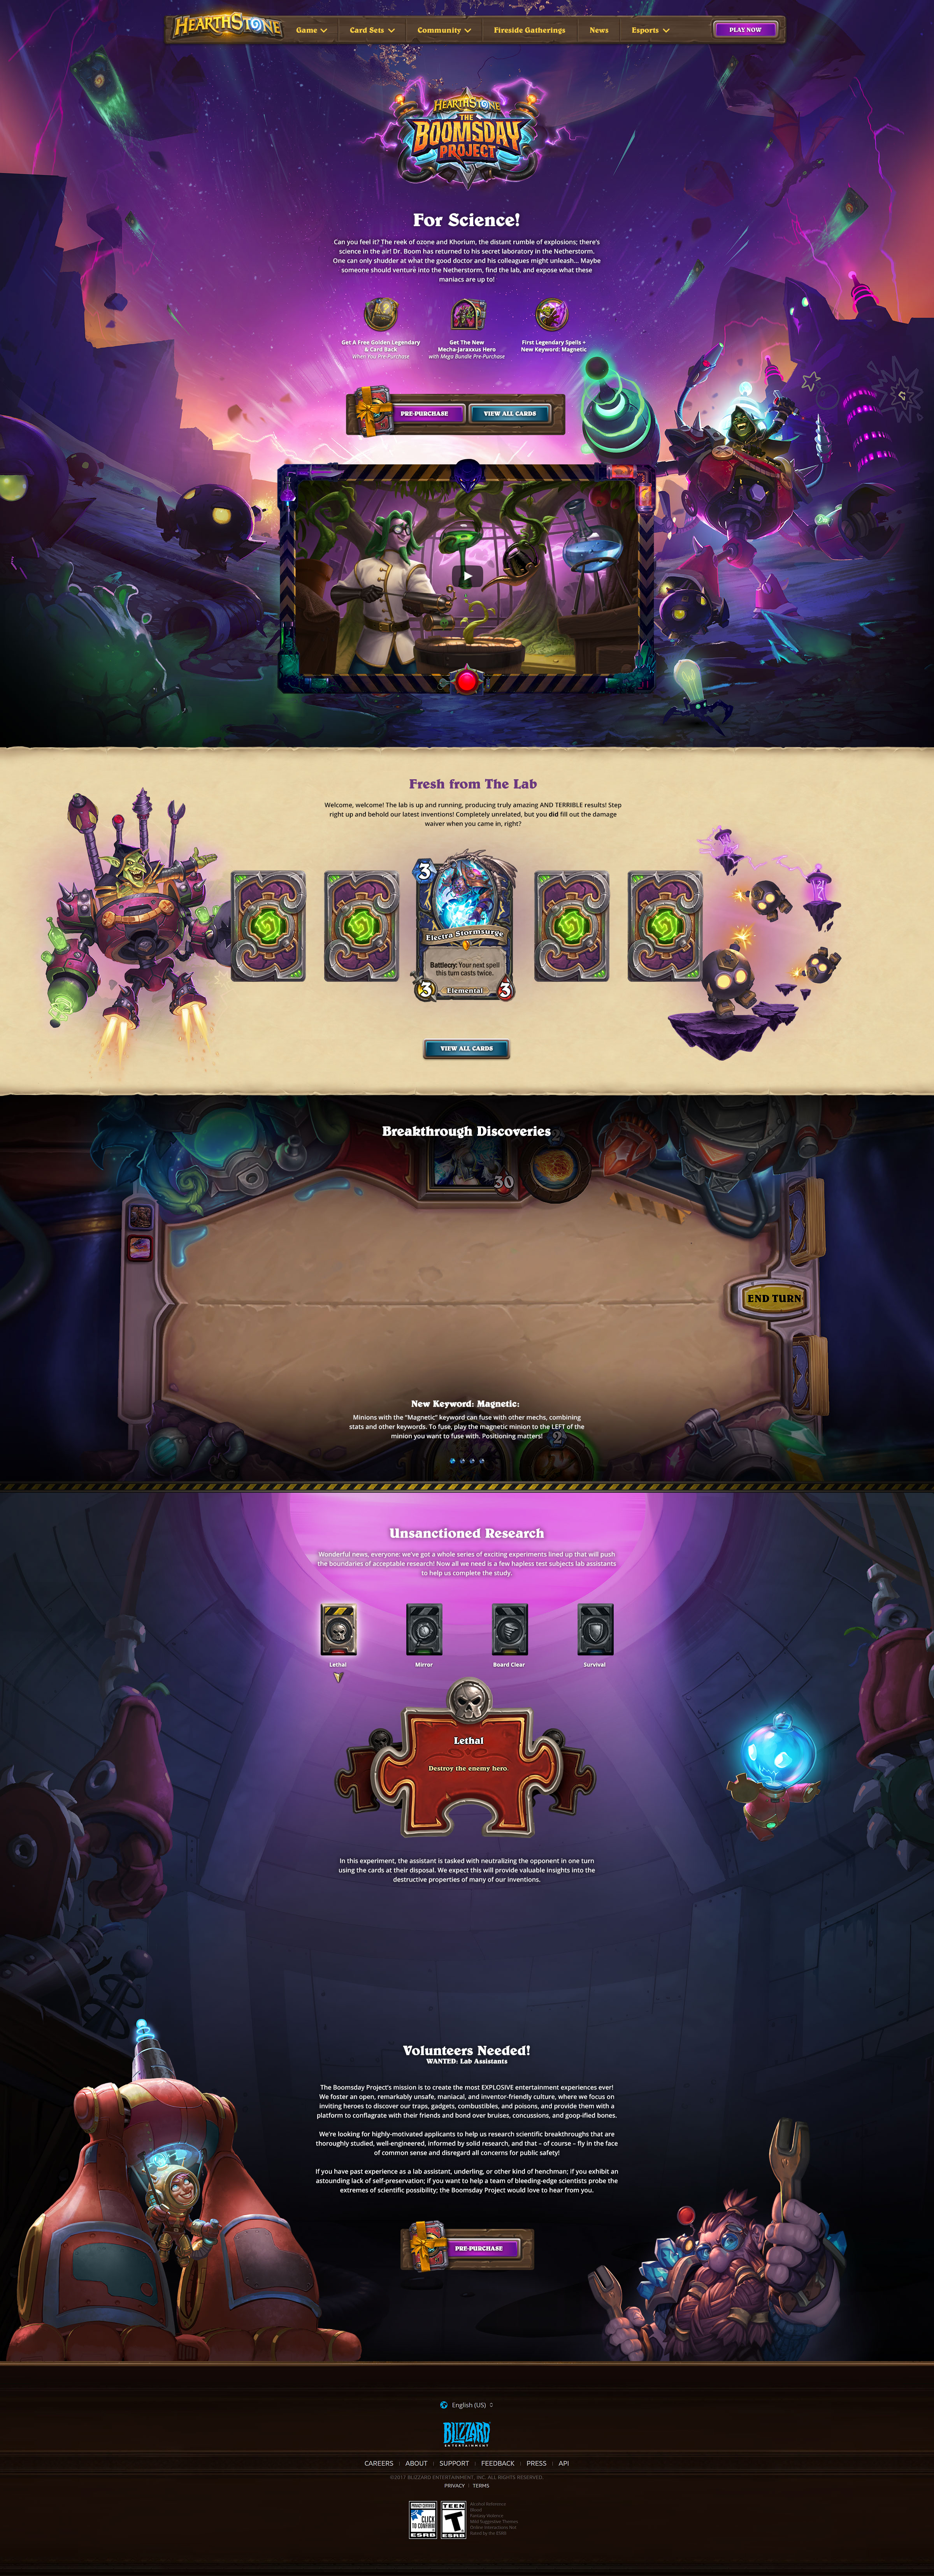 Blizzard - Hearthstone - The Boomsday Project